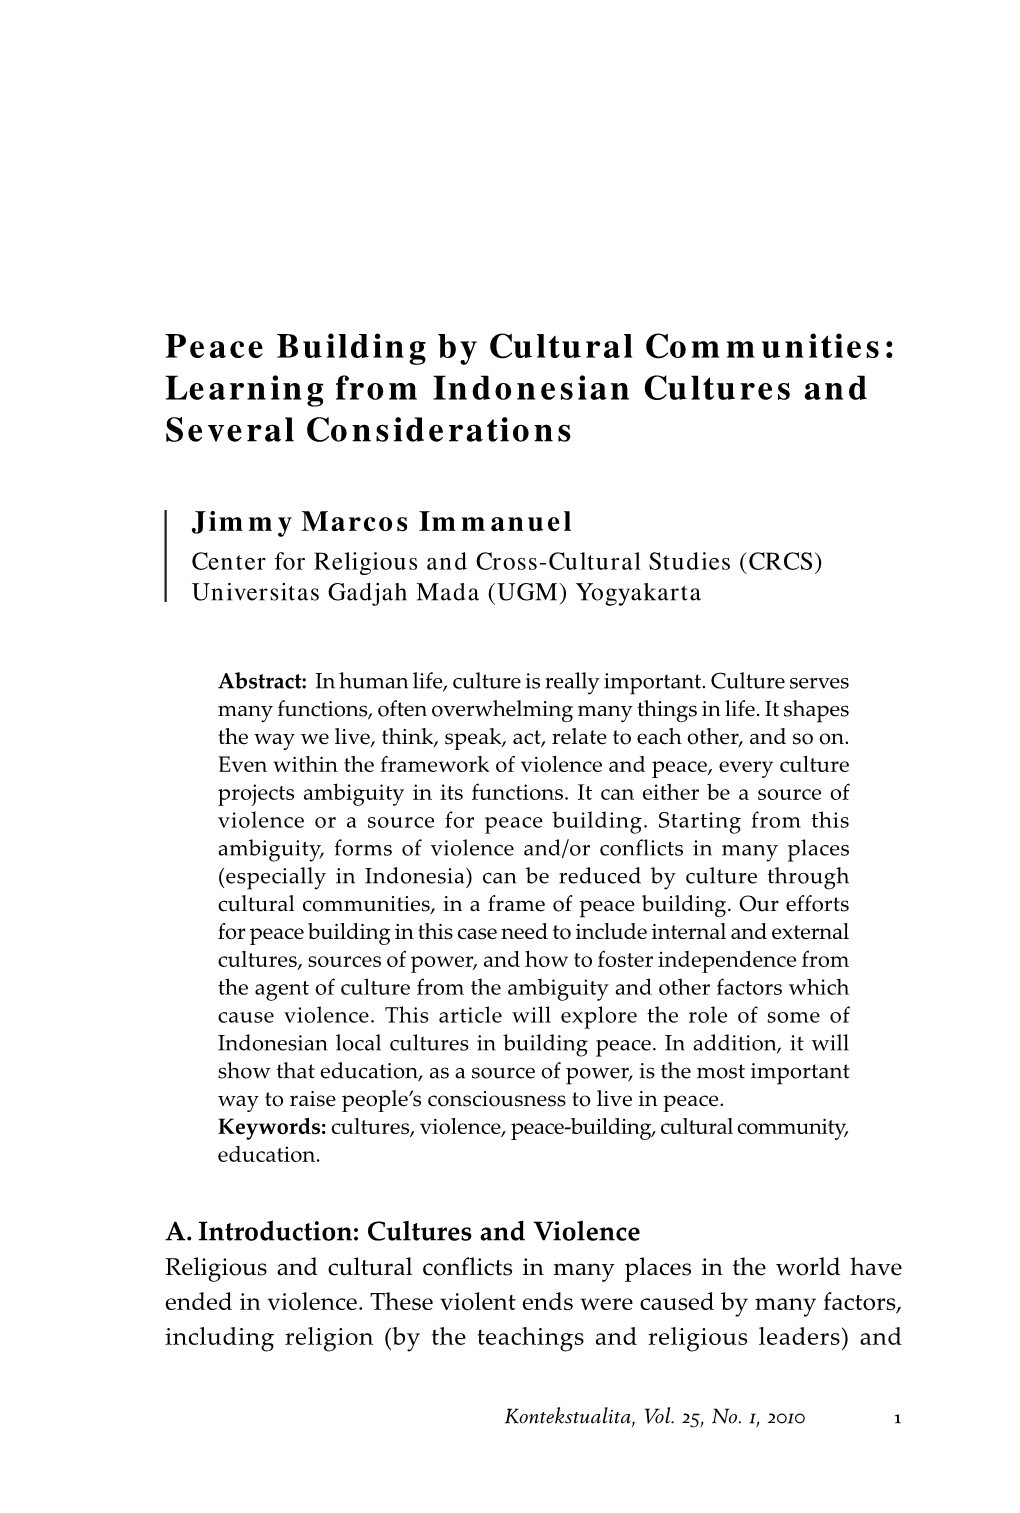 Peace Building by Cultural Communities: Learning from Indonesian Cultures and Several Considerations